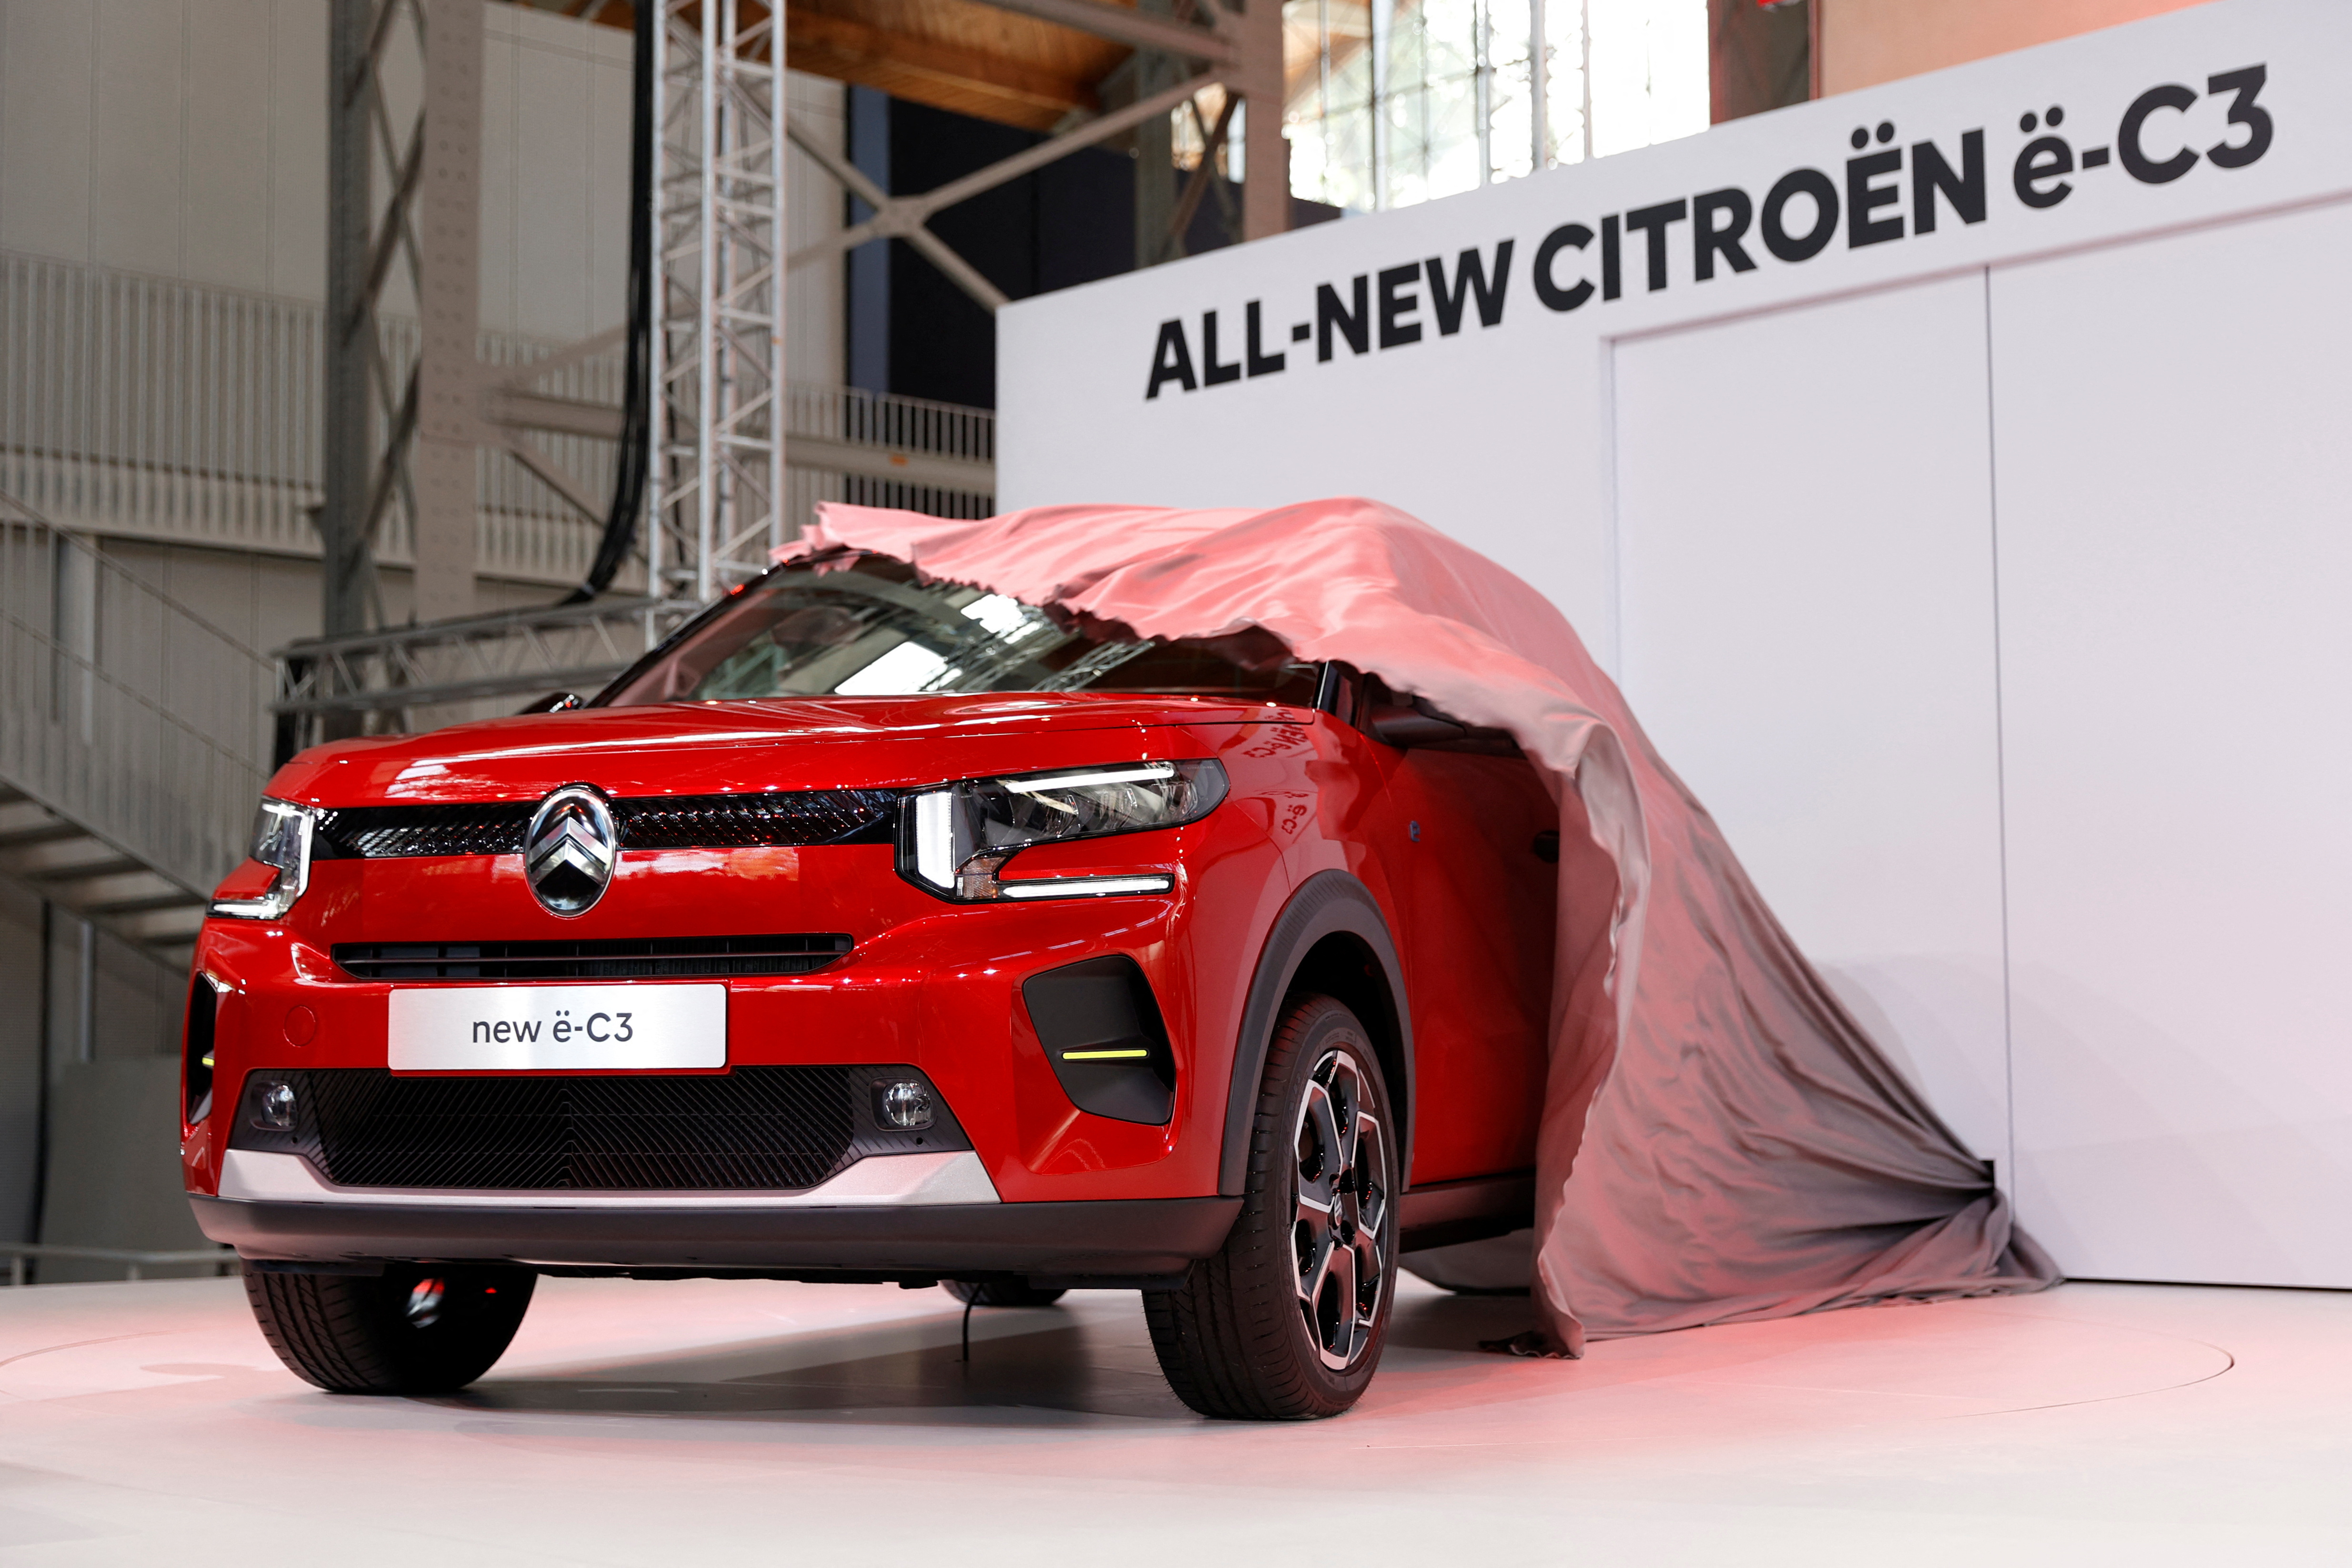 2023 Citroen C3 Shine Top Variant Launch Price Rs 7.6 L - New Features,  Alloys